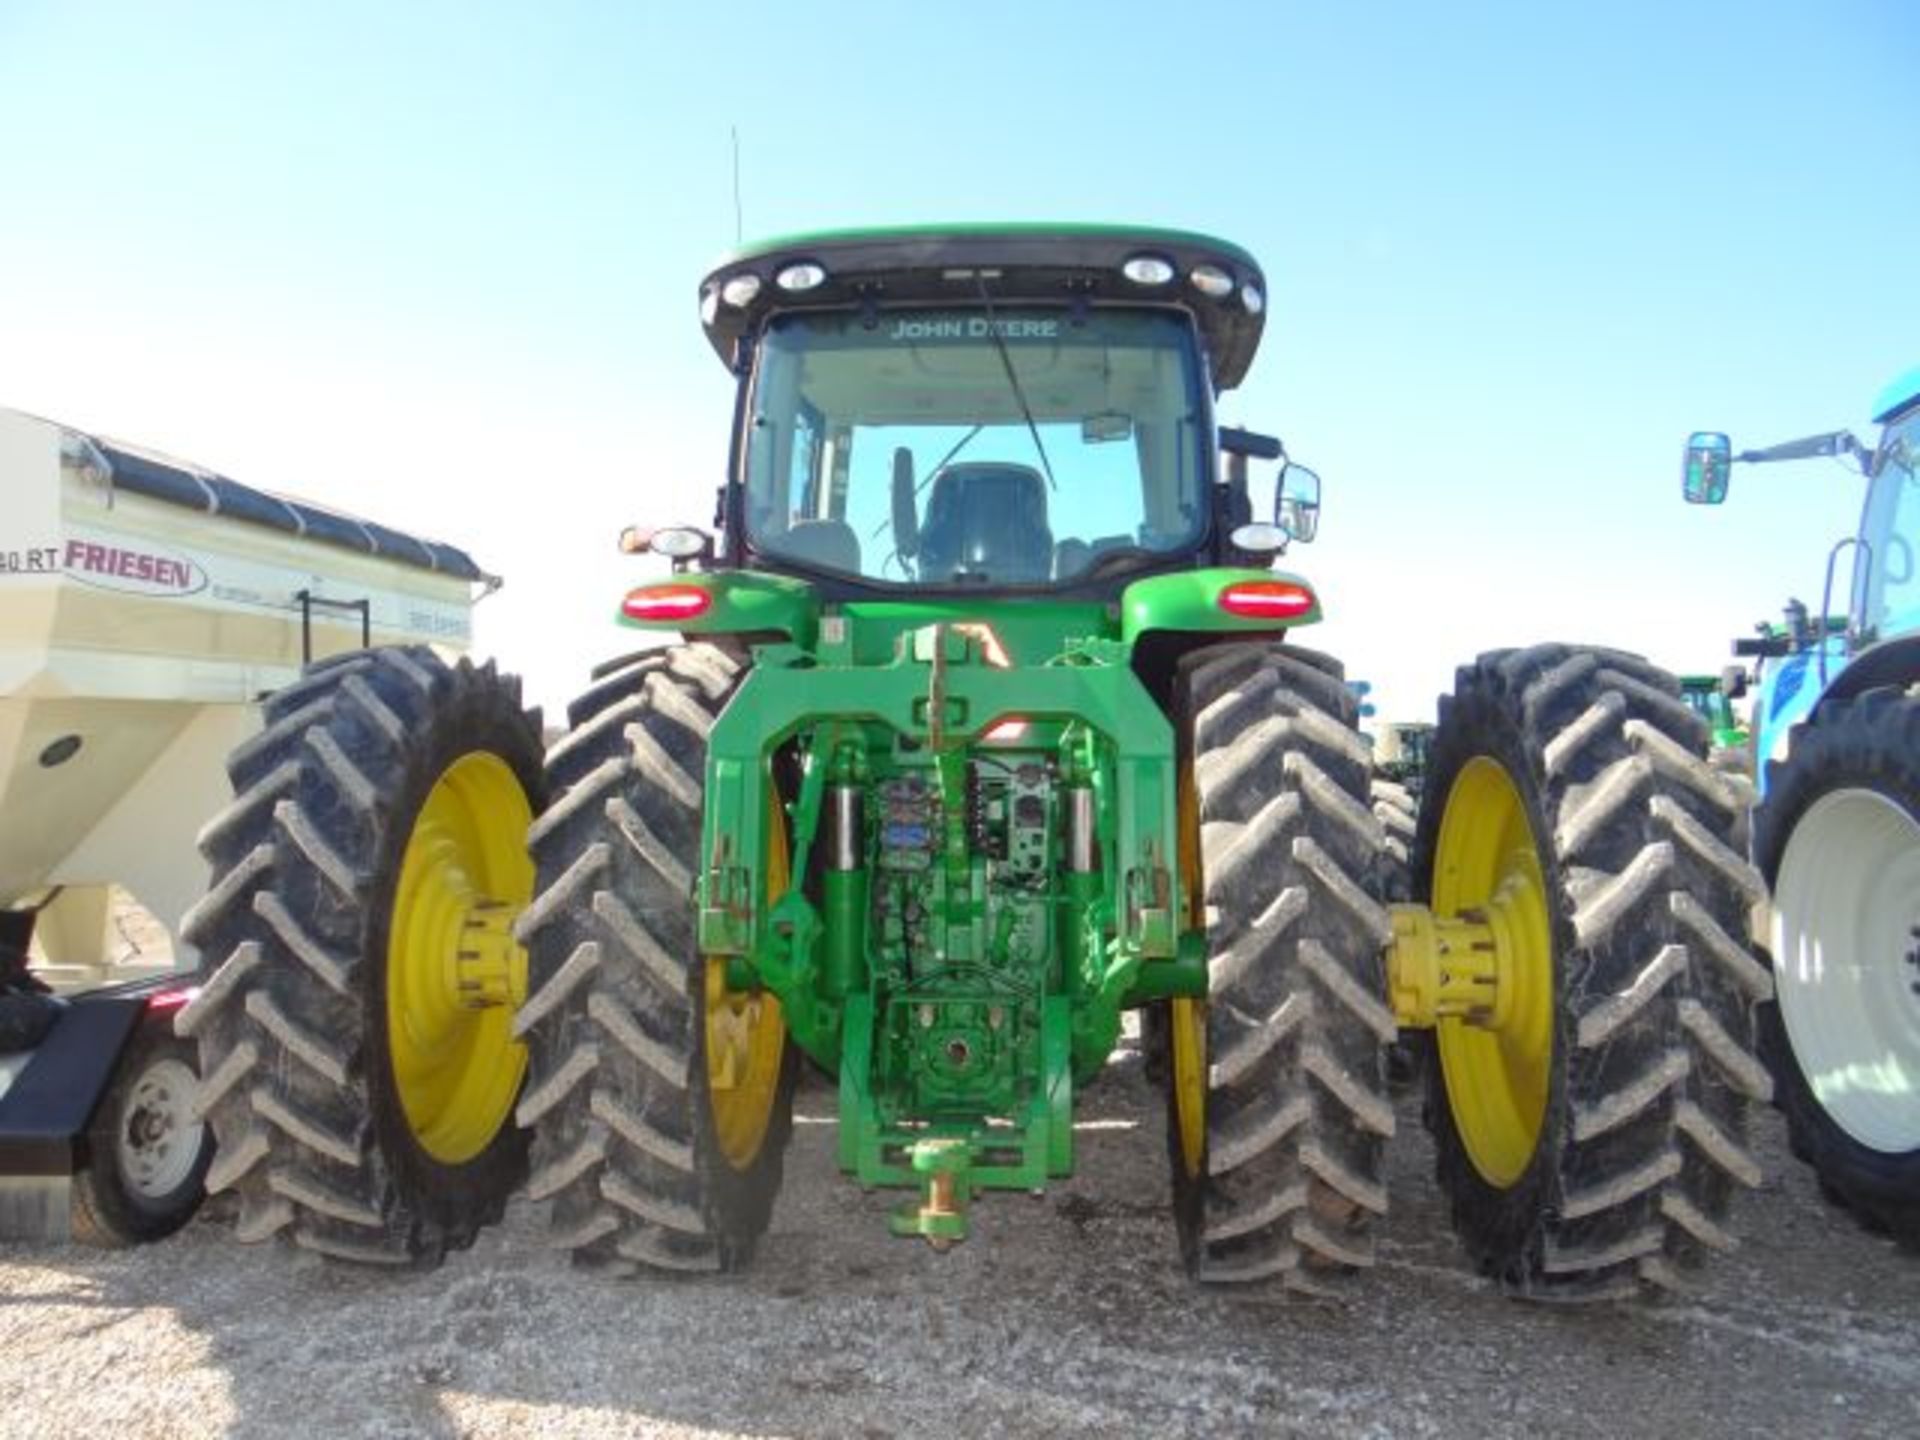 JD 8360R Tractor, 2012 50", Rear Tires, Front Duals, 4 Remotes, Auto Trac, IVT, ILS, Wts, 5244 hrs - Image 2 of 6